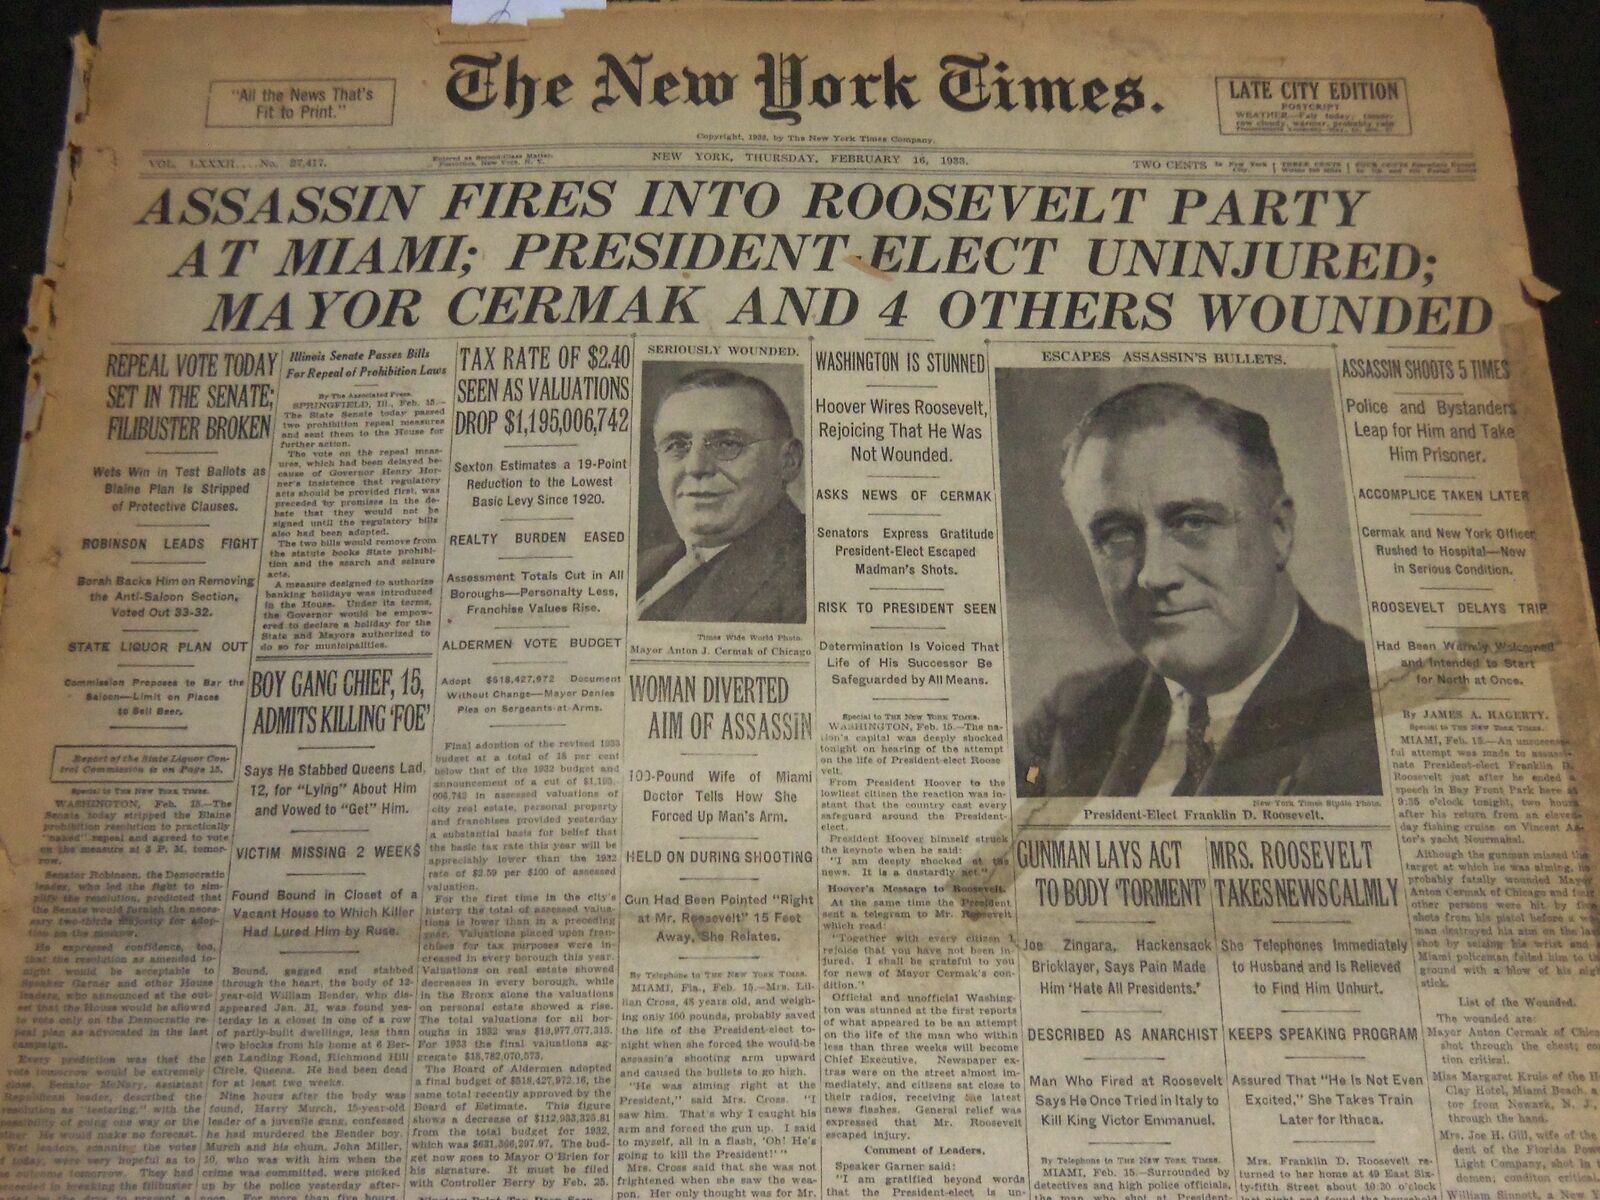 1933 FEBRUARY 16 NEW YORK TIMES - ASSASSIN FIRES INTO ROOSEVELT PARTY - NT 6172